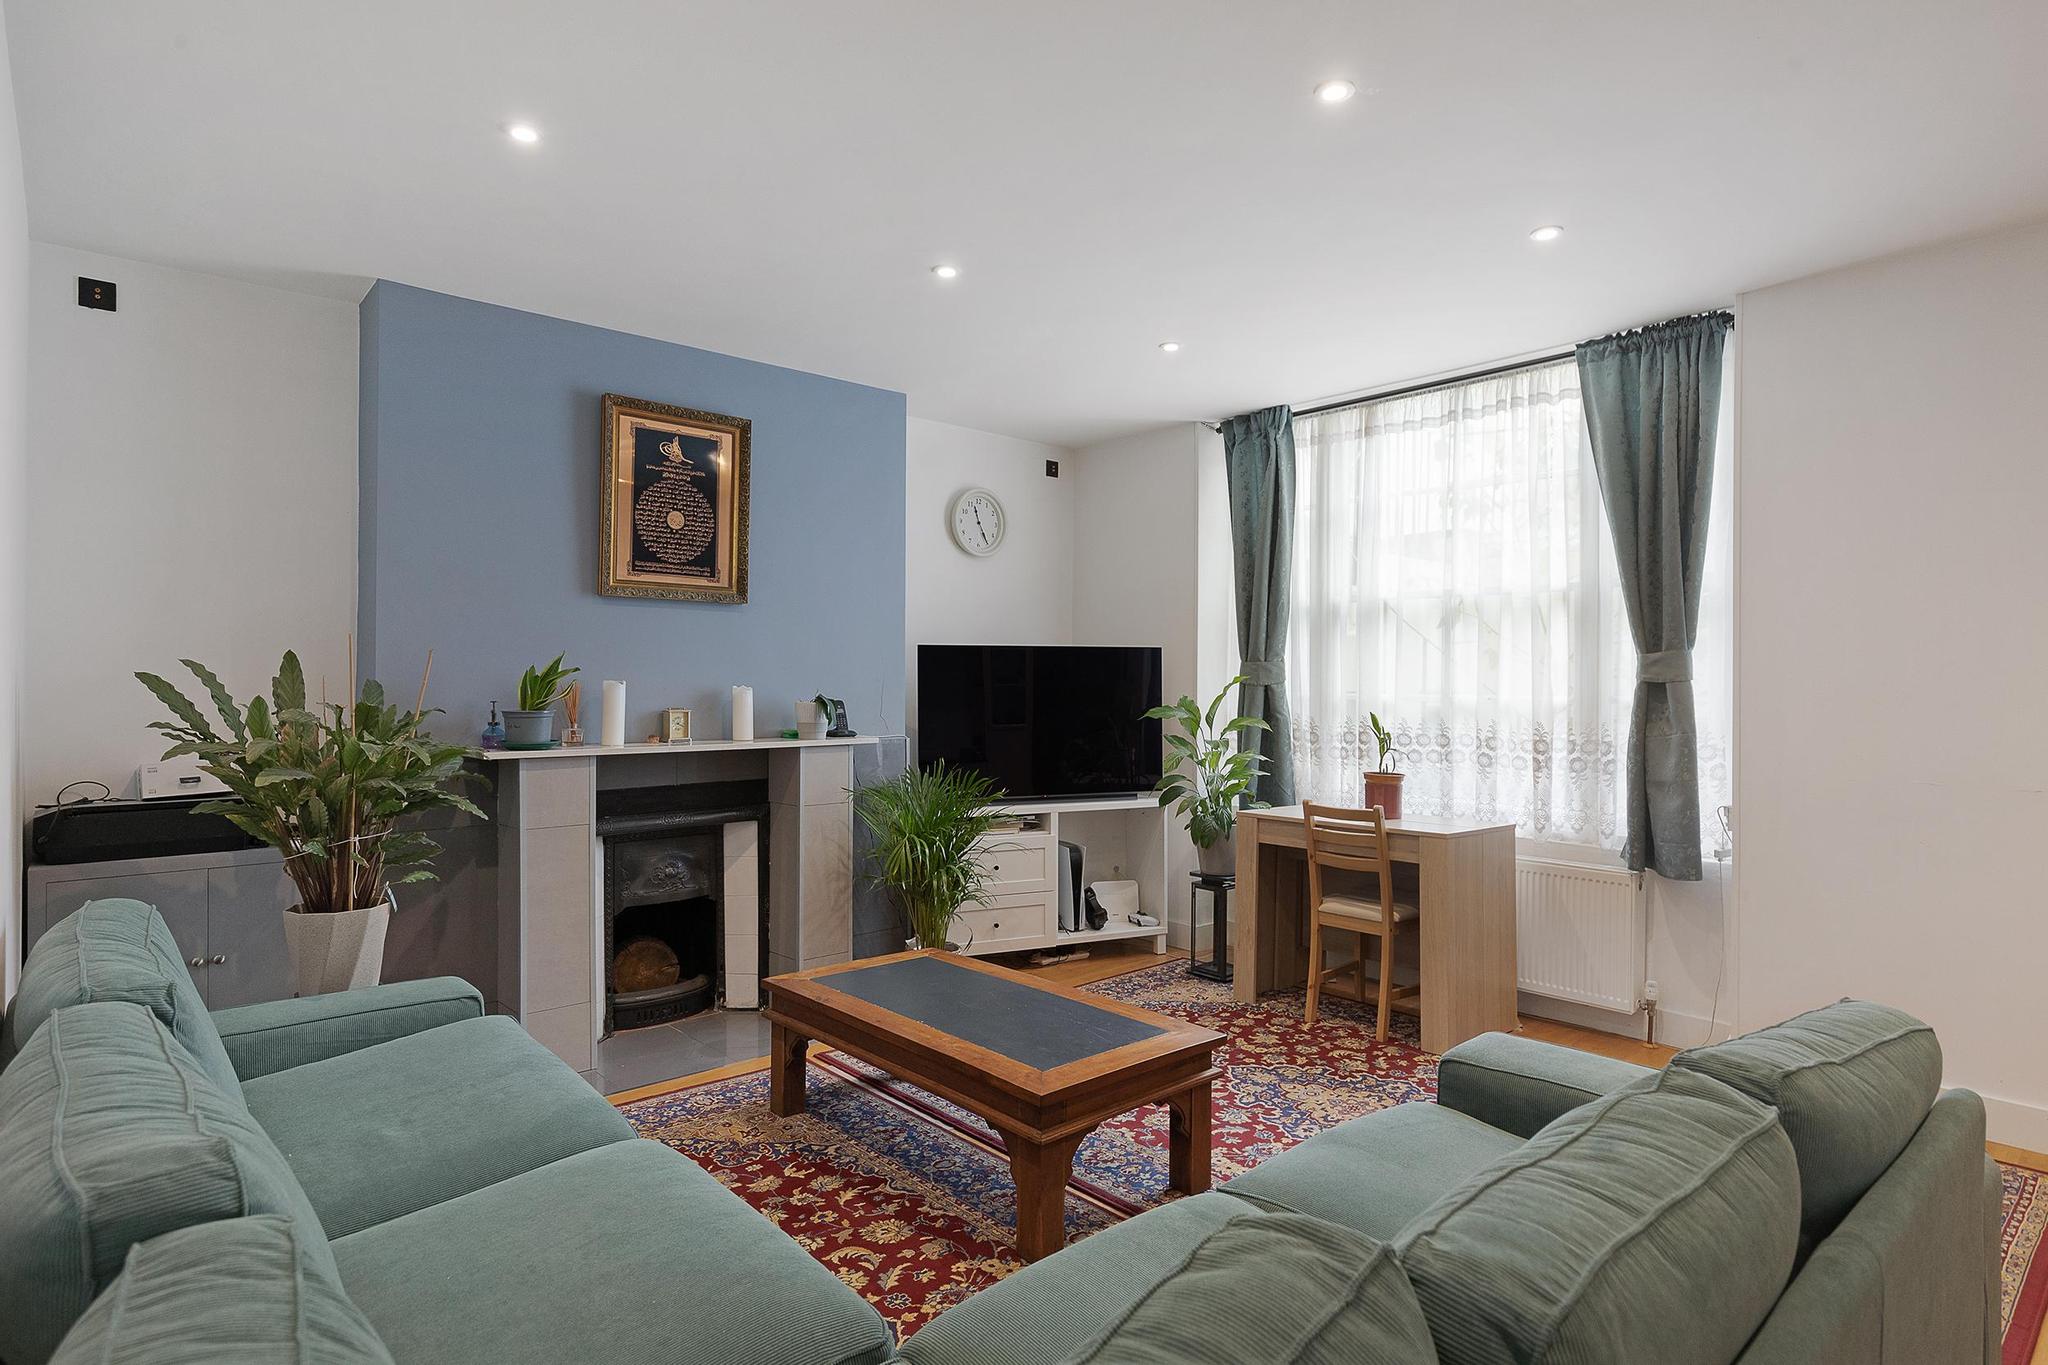 5 bedroom terraced house for sale in London